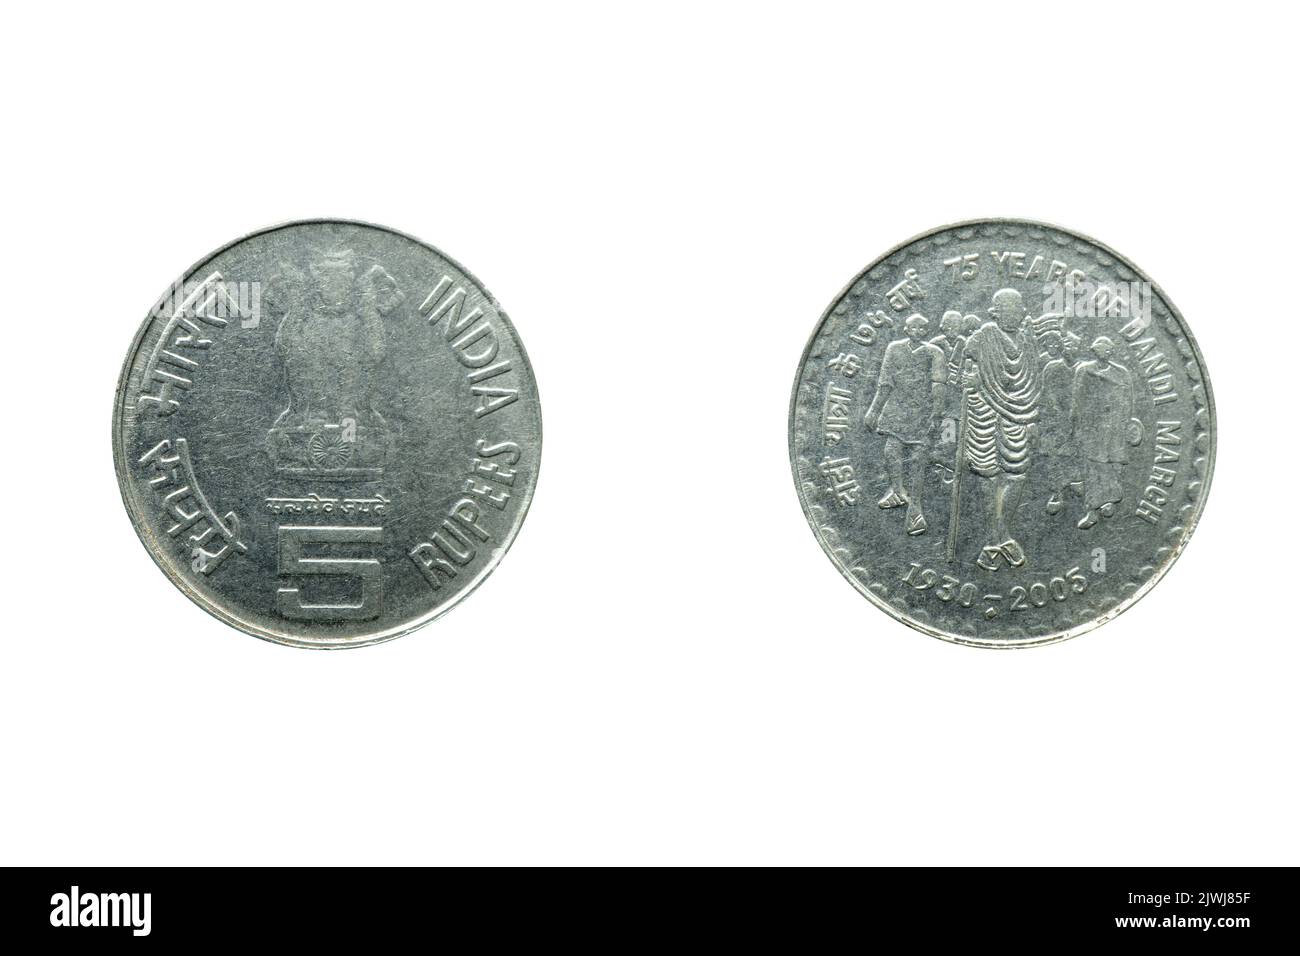 Five Rupee Coin,  front and back, 75 years  Mahatma Gandhi. Dandi march, India Stock Photo